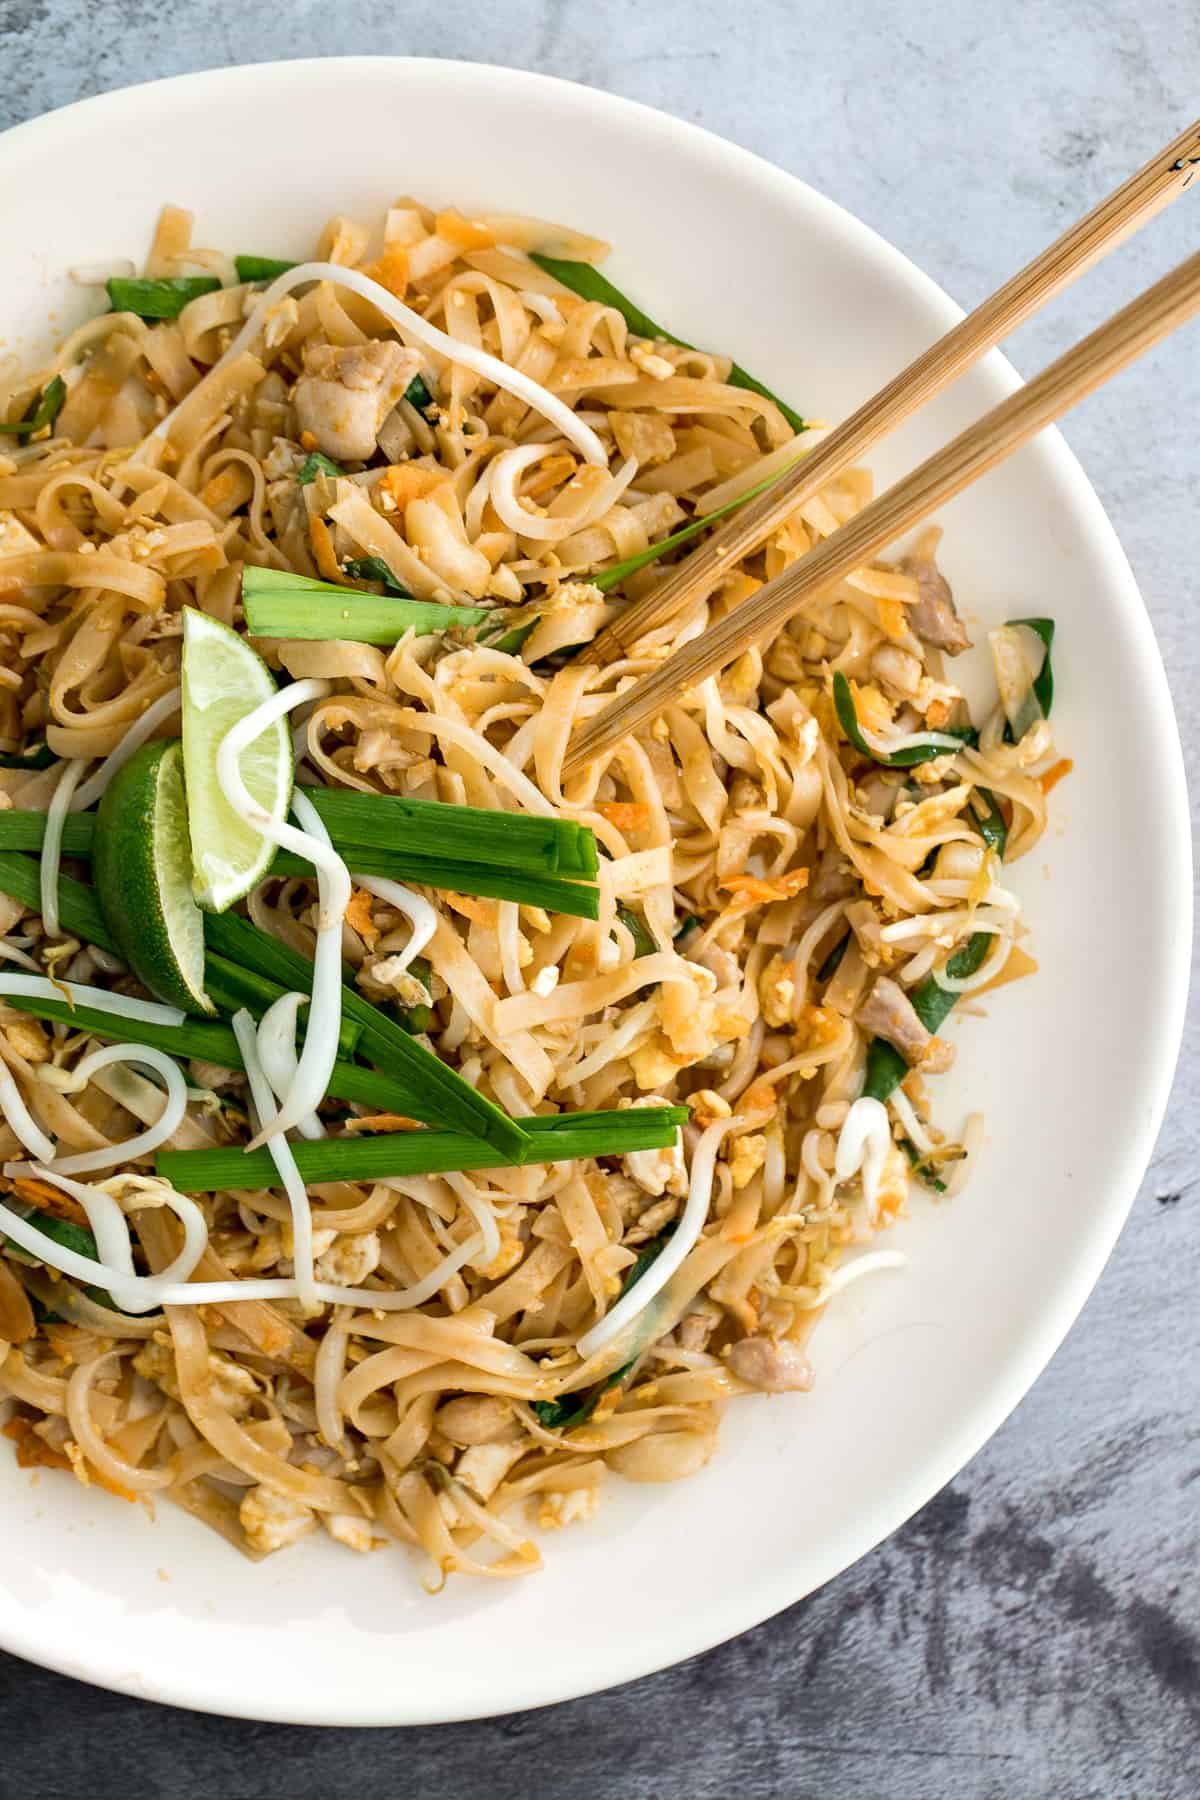 No more takeout when you can make flavourful, restaurant-style, authentic chicken Pad Thai at home in just 10 minutes. It's sweet, savoury, sour and nutty. | aheadofthyme.com